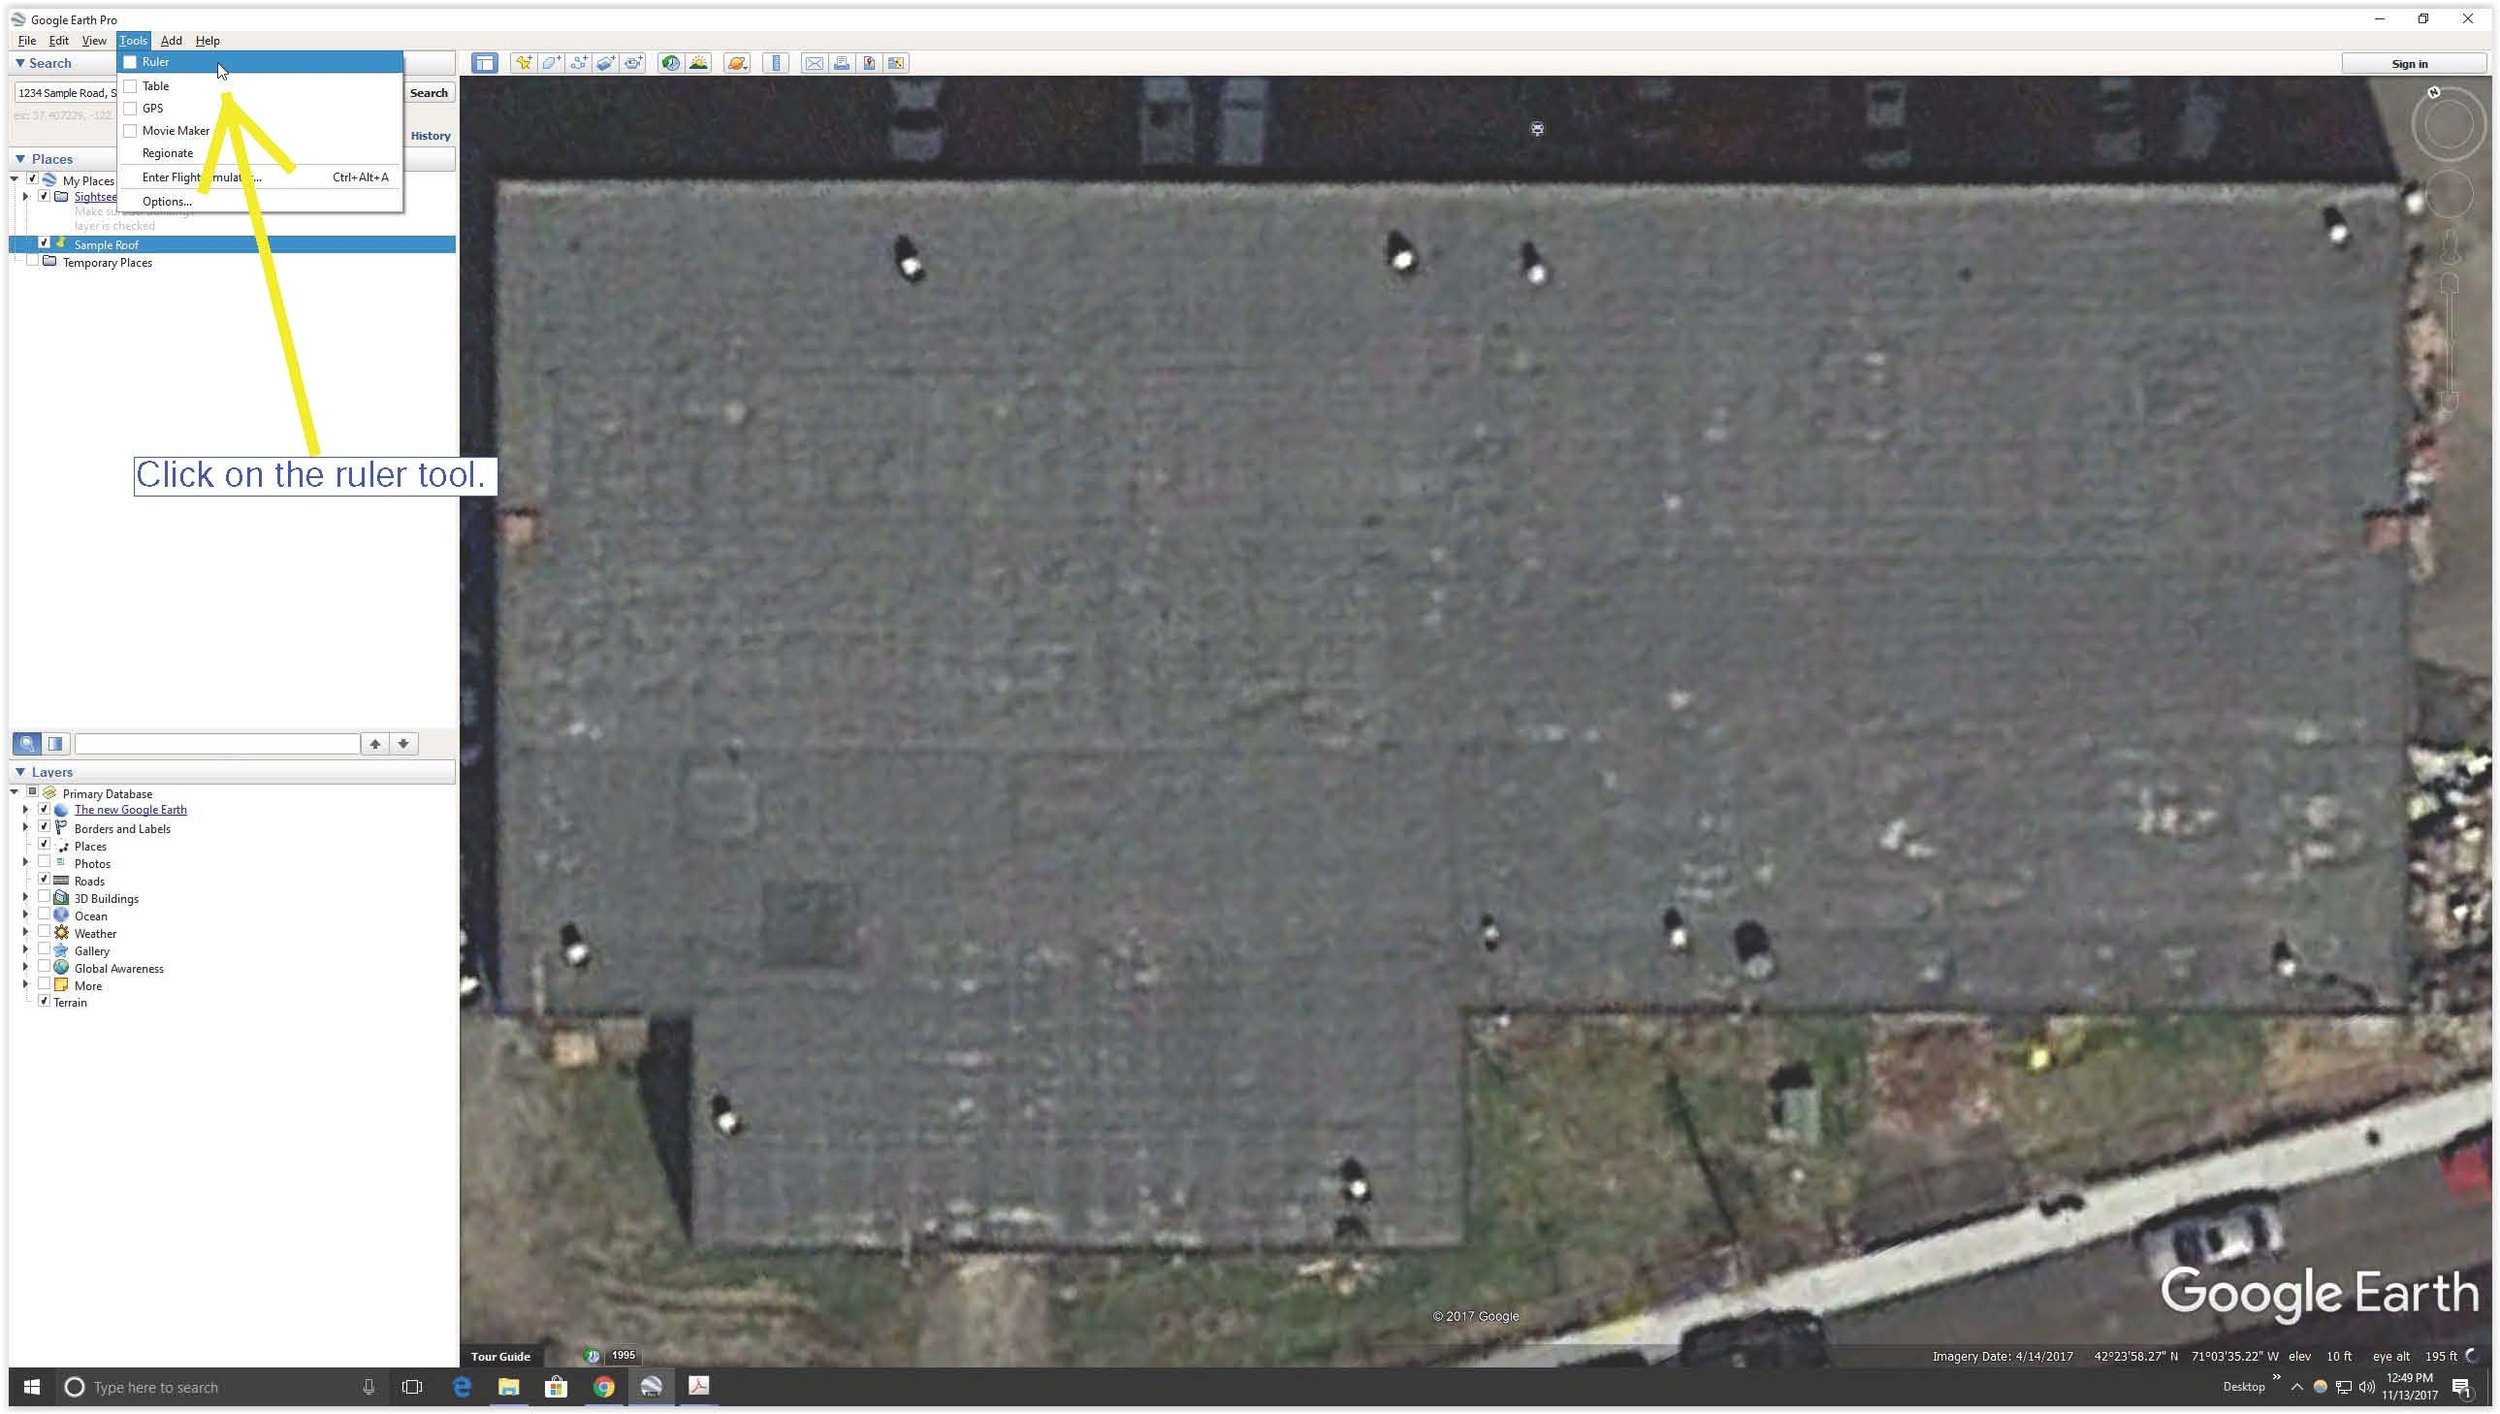 Location of the ruler tool in Google Earth.